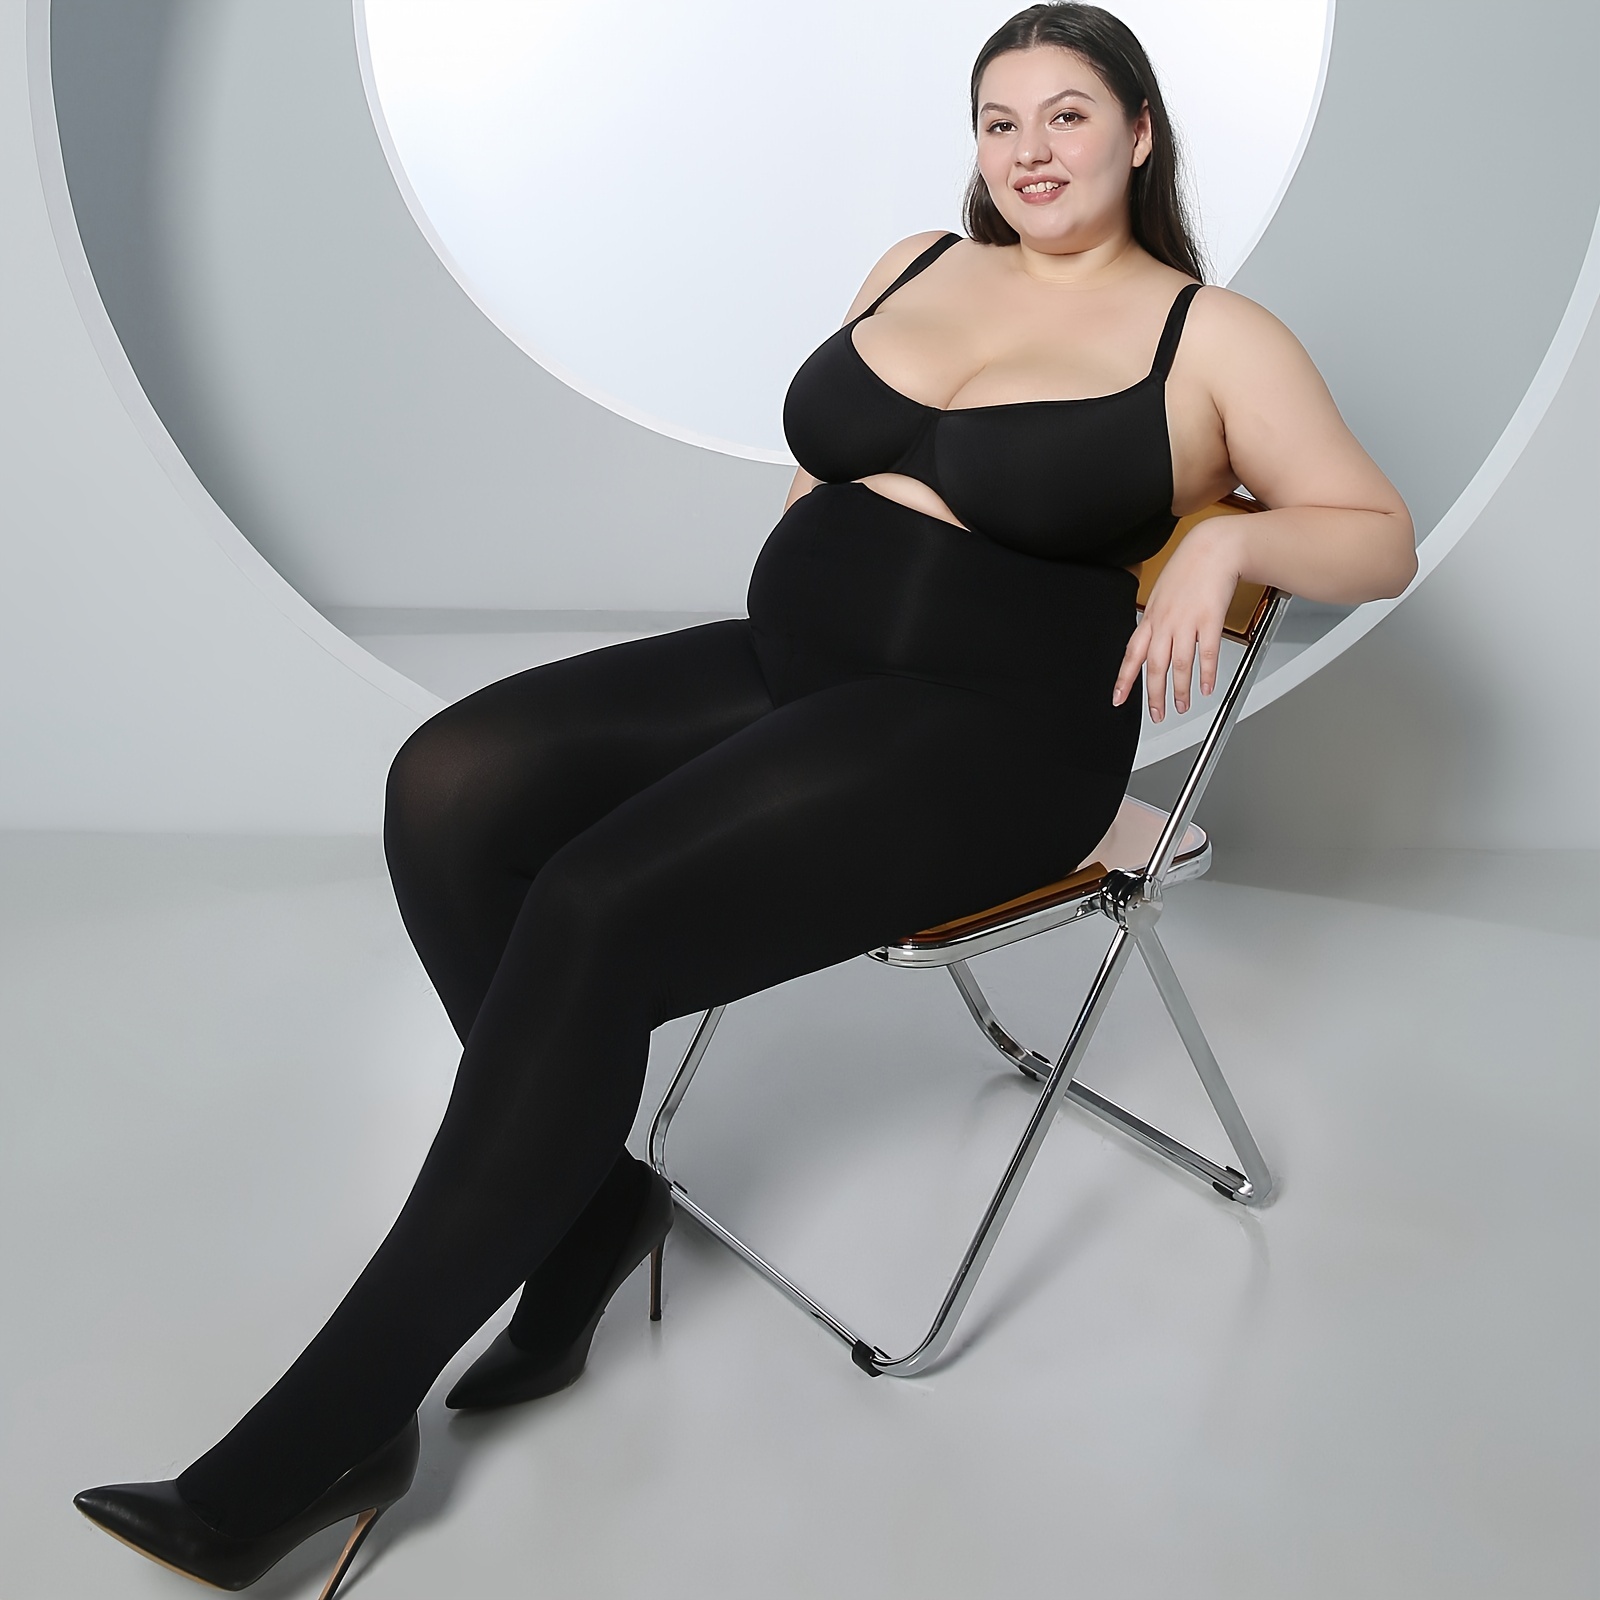 Plus Size Tights Opaque 120D Control Top Pantyhose, Women's Plus Ultra-Soft  Stockings, Fits For 160-220LBS